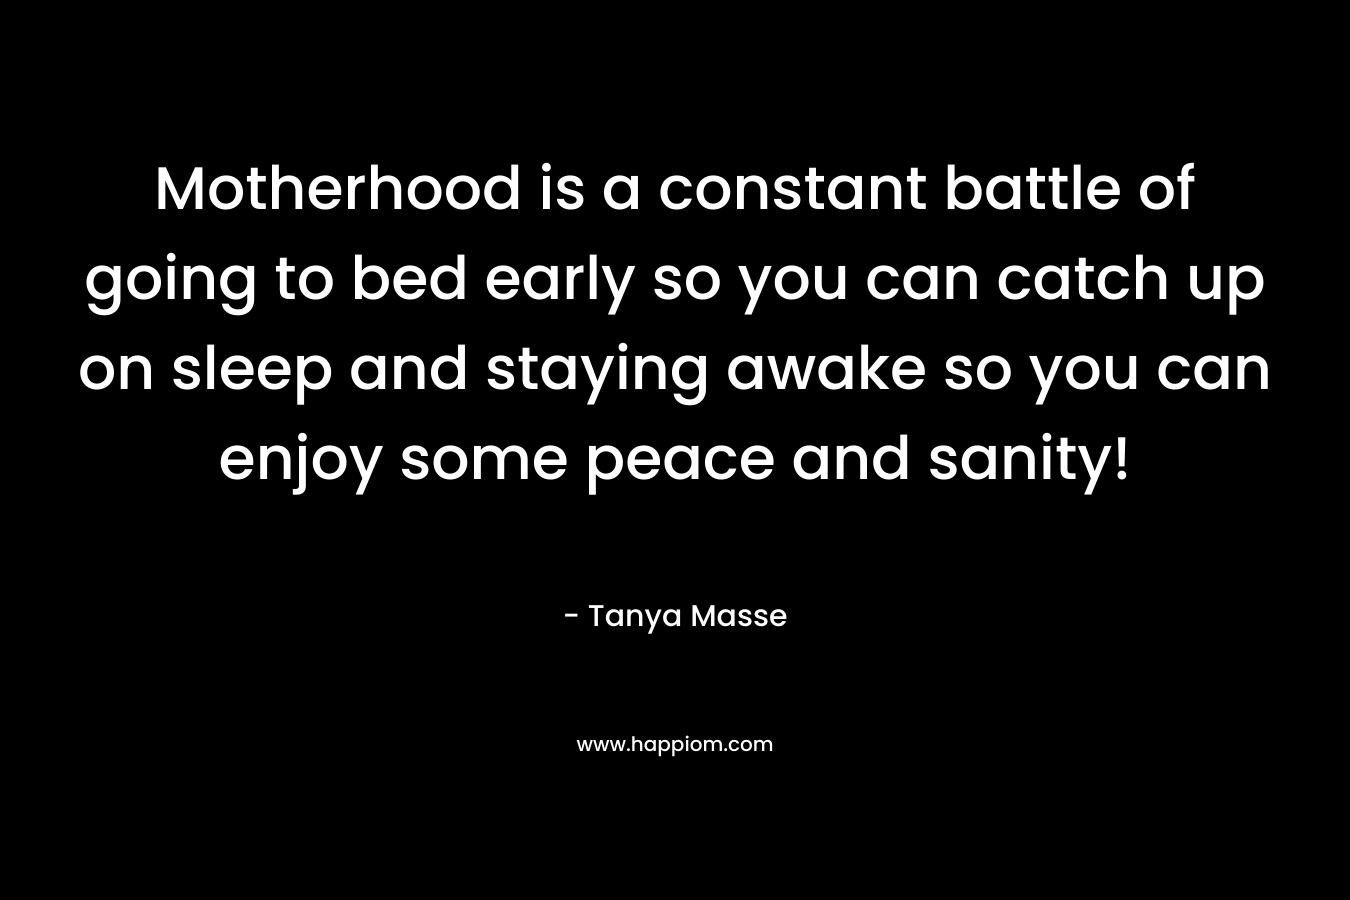 Motherhood is a constant battle of going to bed early so you can catch up on sleep and staying awake so you can enjoy some peace and sanity! – Tanya Masse